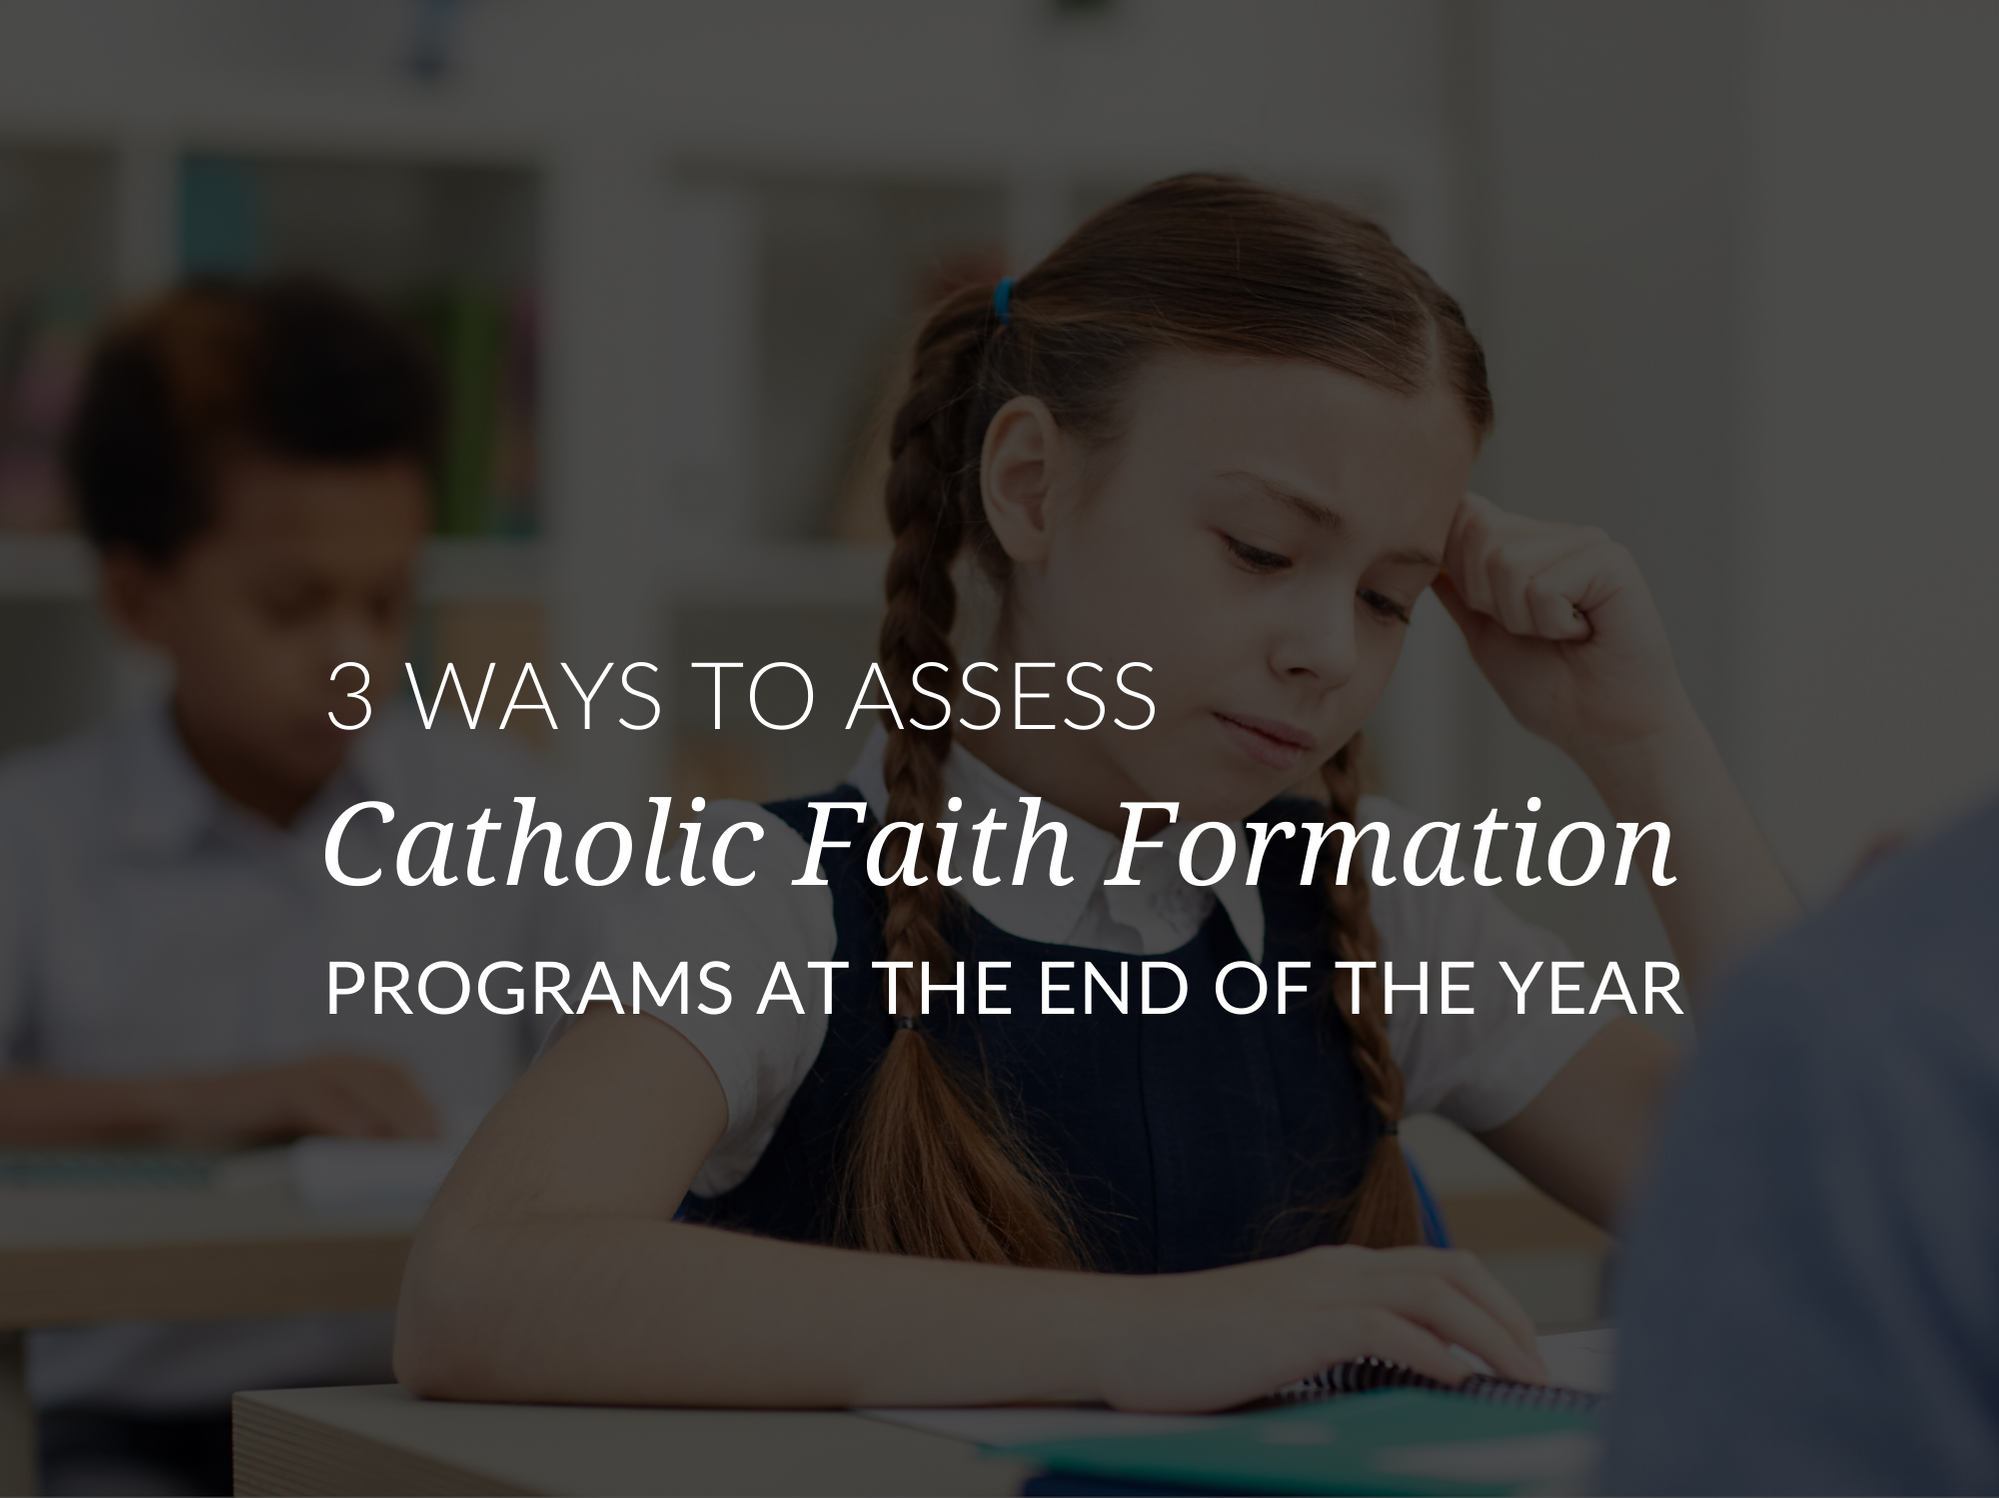 3-ways-to-assess-catholic-faith-formation-programs-at-the-end-of-the-year